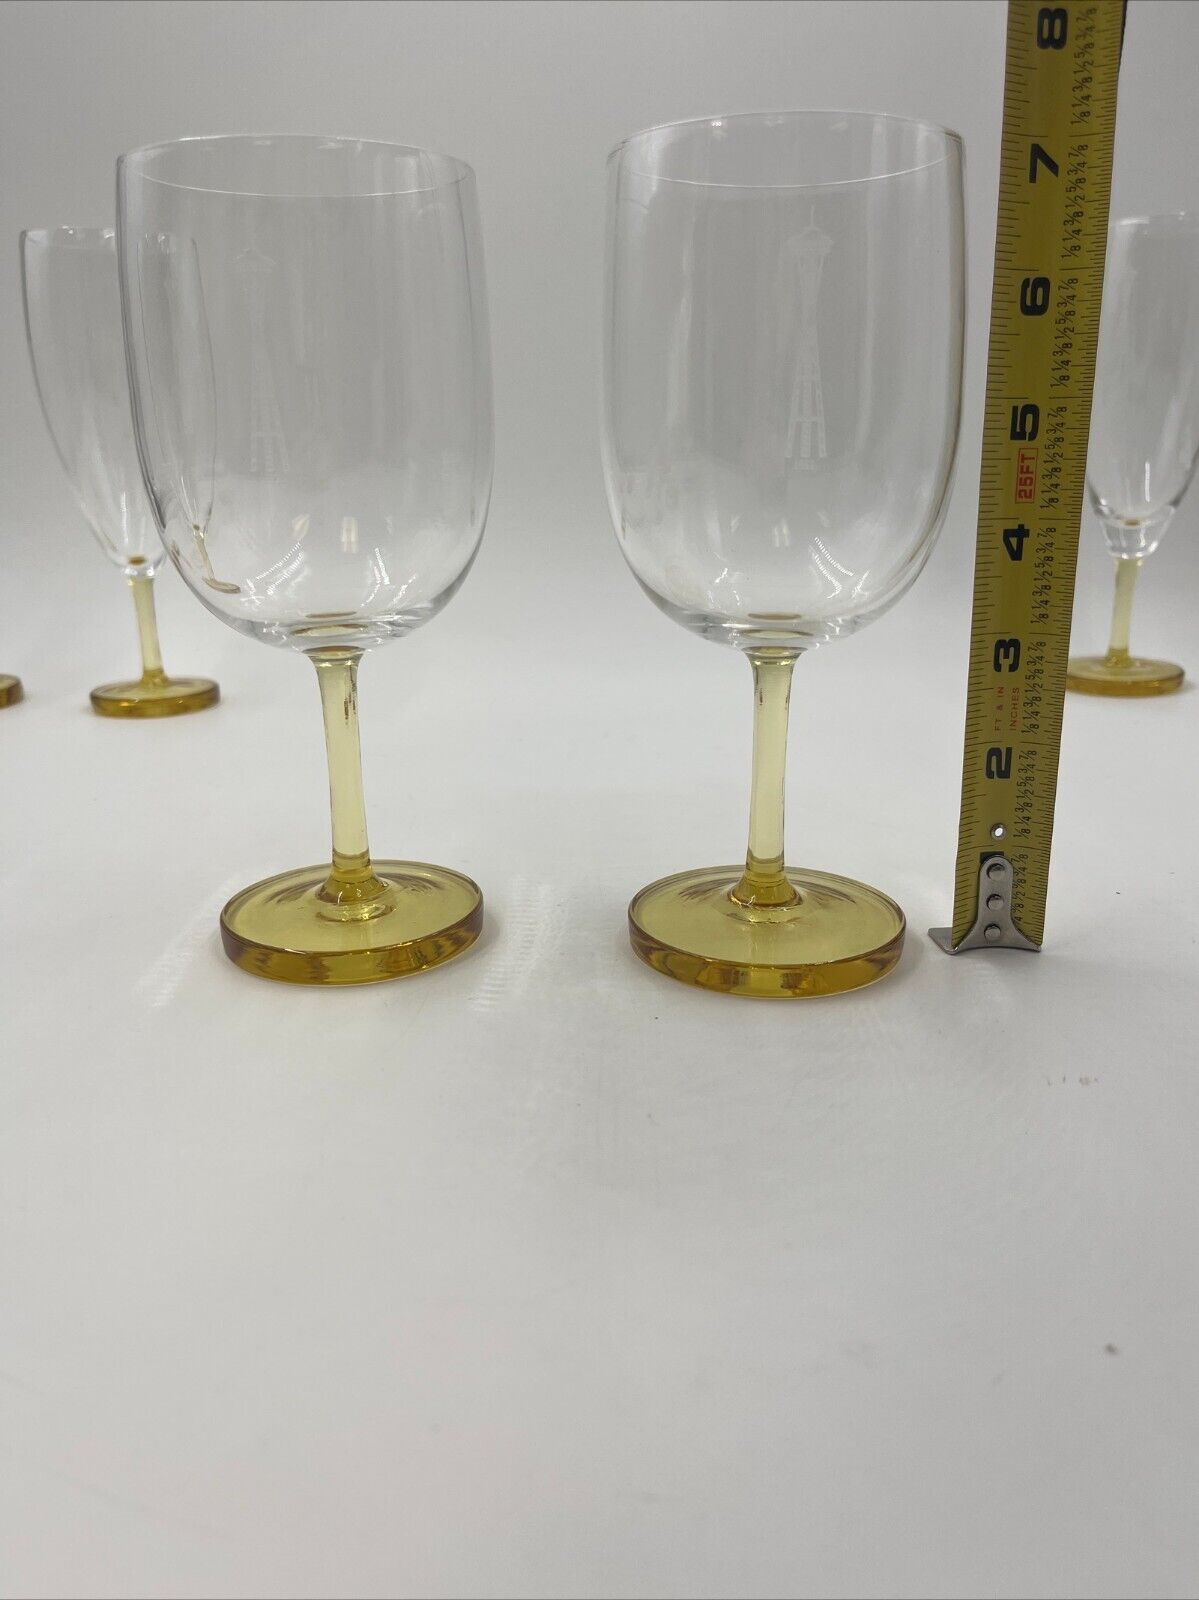 1962 SEATTLE WORLDS FAIR CRYSTAL STEMWARE WITH ETCHED SPACE NEEDLE & AMBER STEM